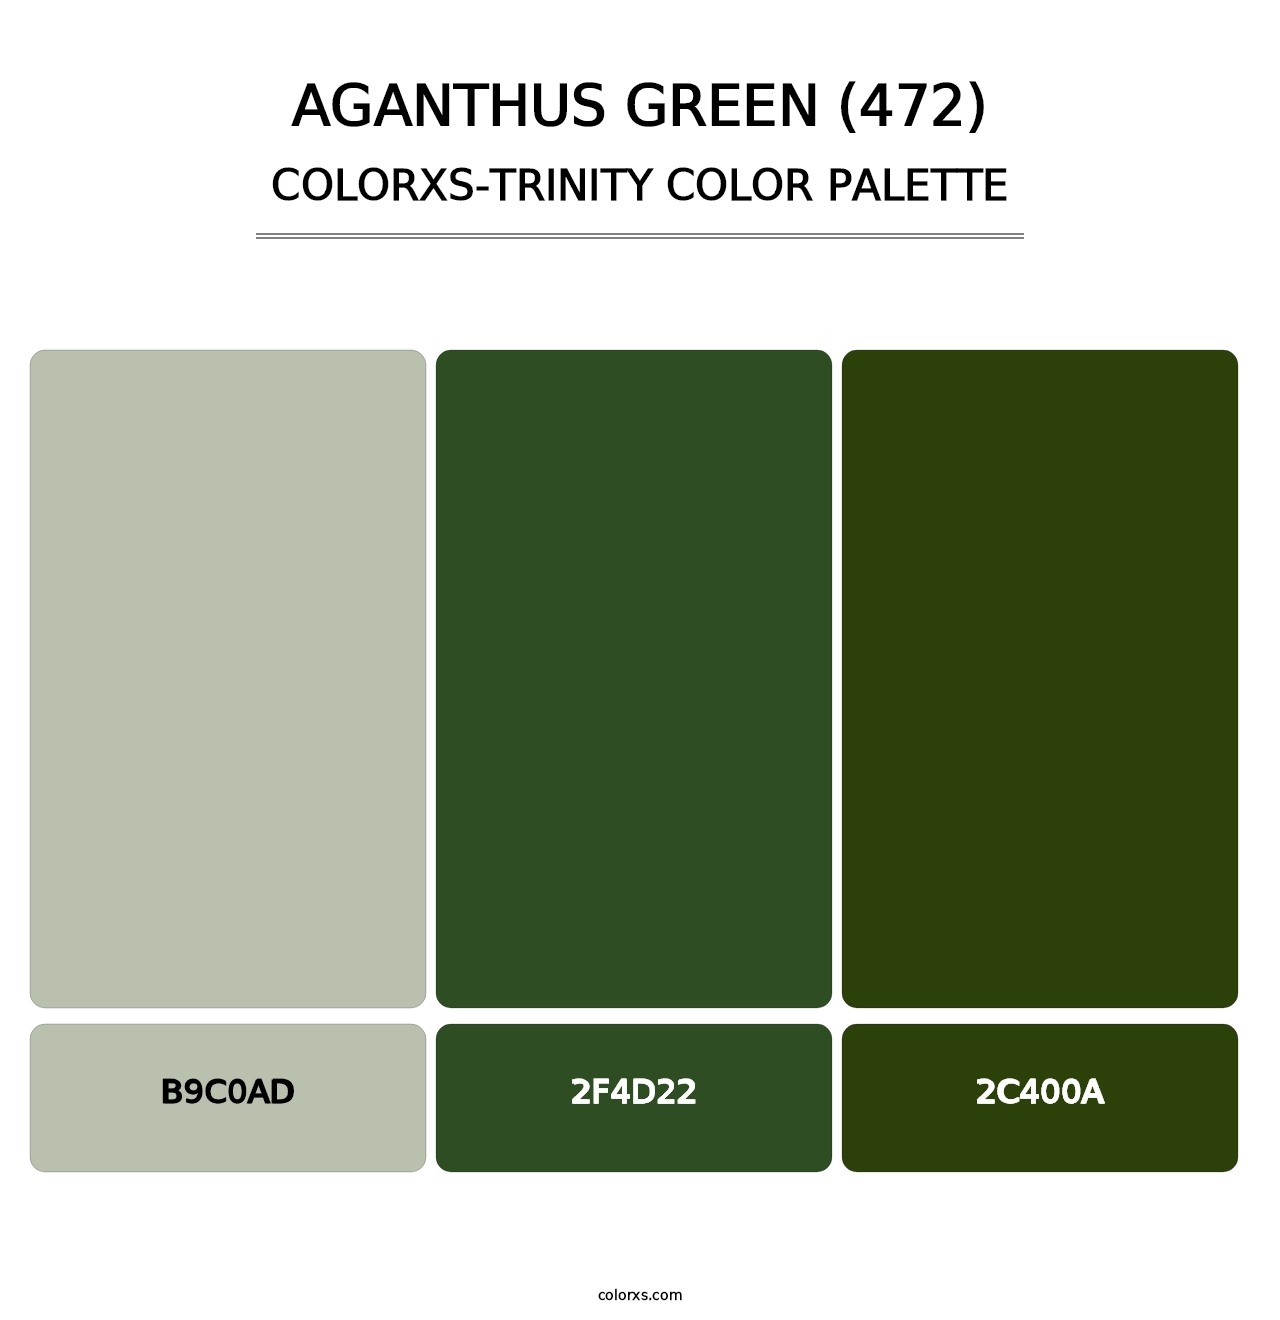 Aganthus Green (472) - Colorxs Trinity Palette